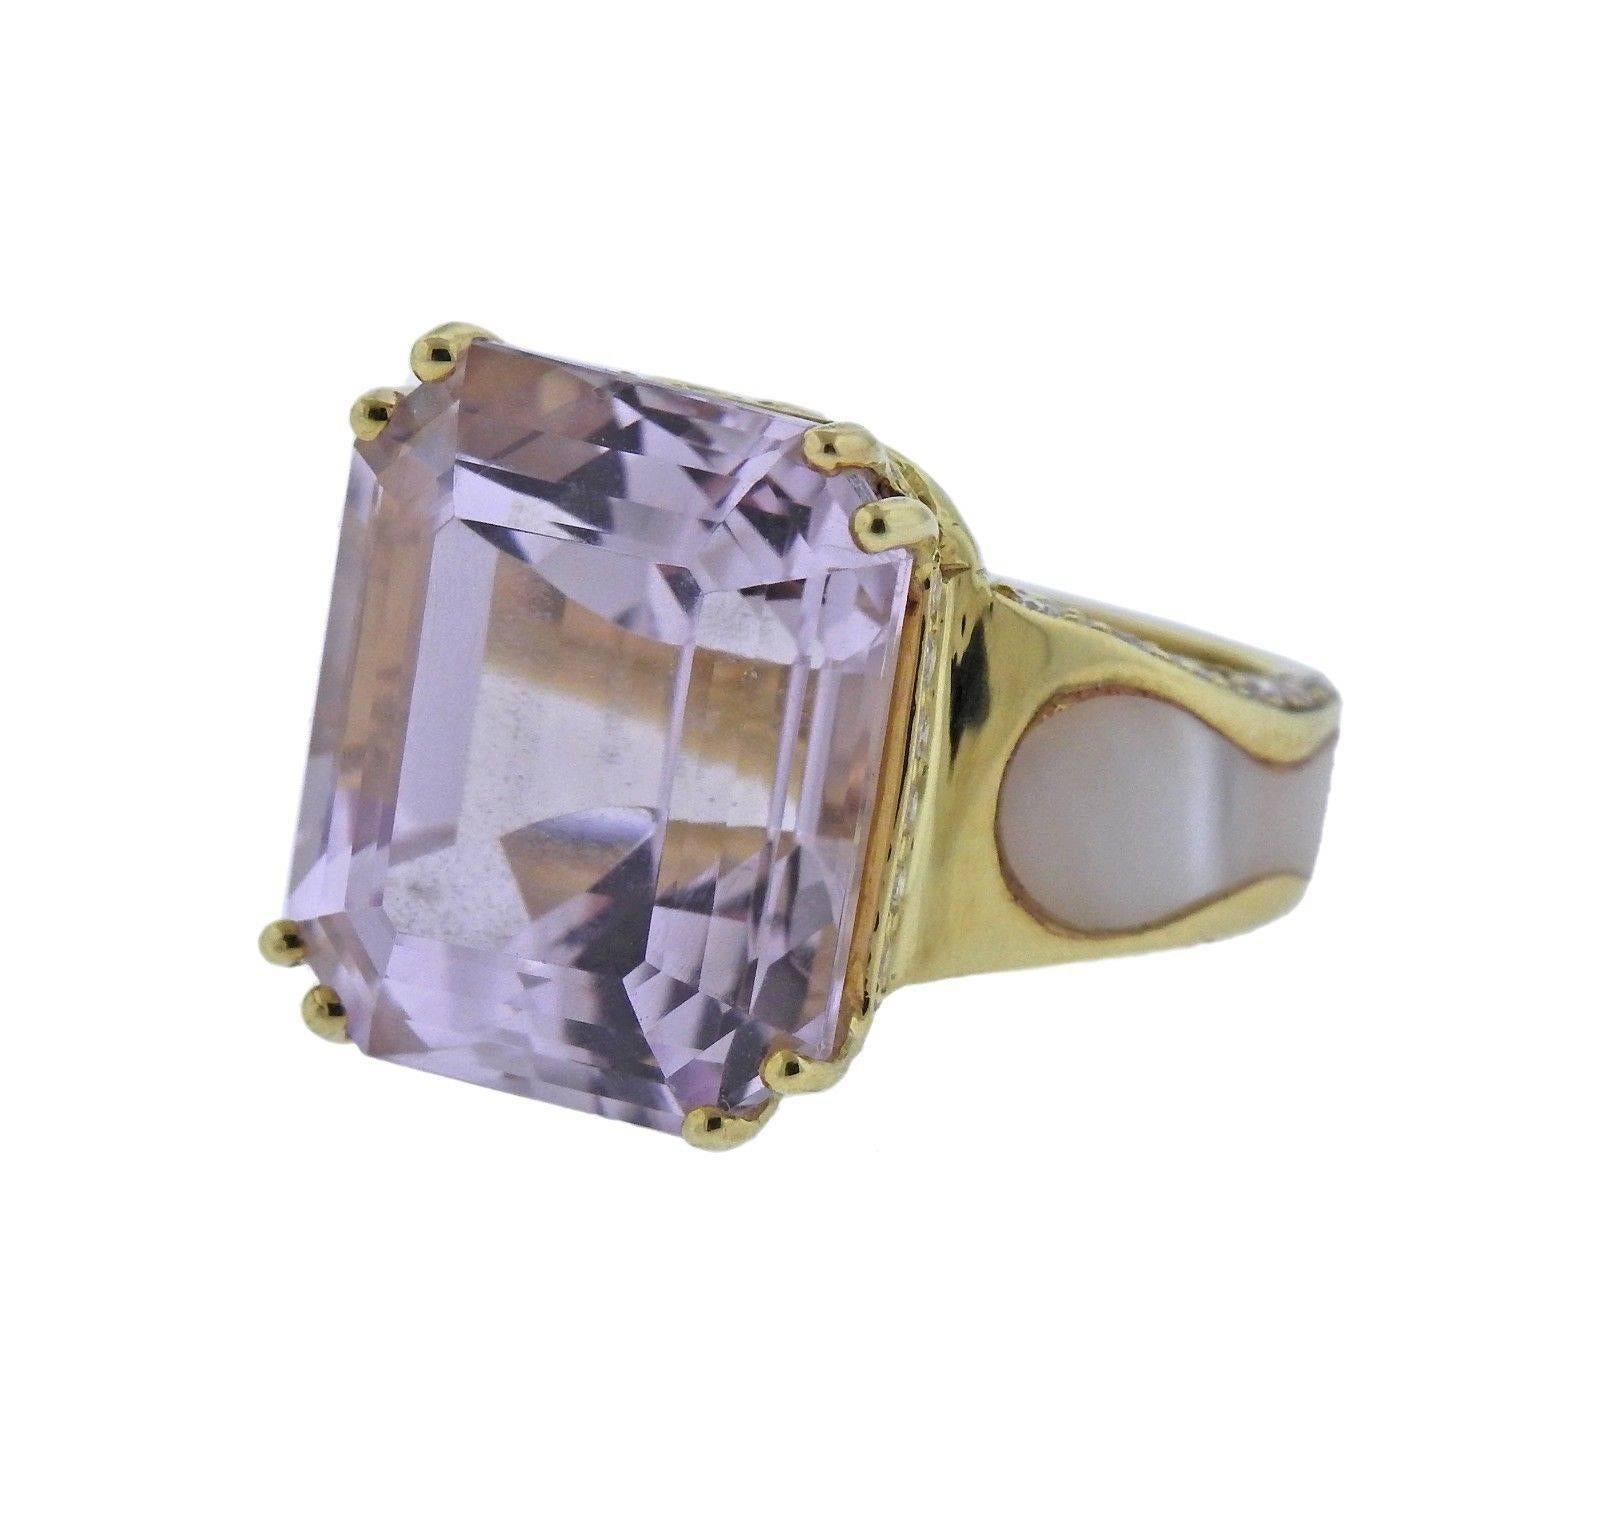 An 18k gold ring set with a 20 carat Kunzite adorned with mother-of-pearl and approximately 0.80ctw of G/VS diamonds.  The ring is a size 6 1/4 and the top measures 15mm x 18mm.  The weight of the peice is 15 grams.